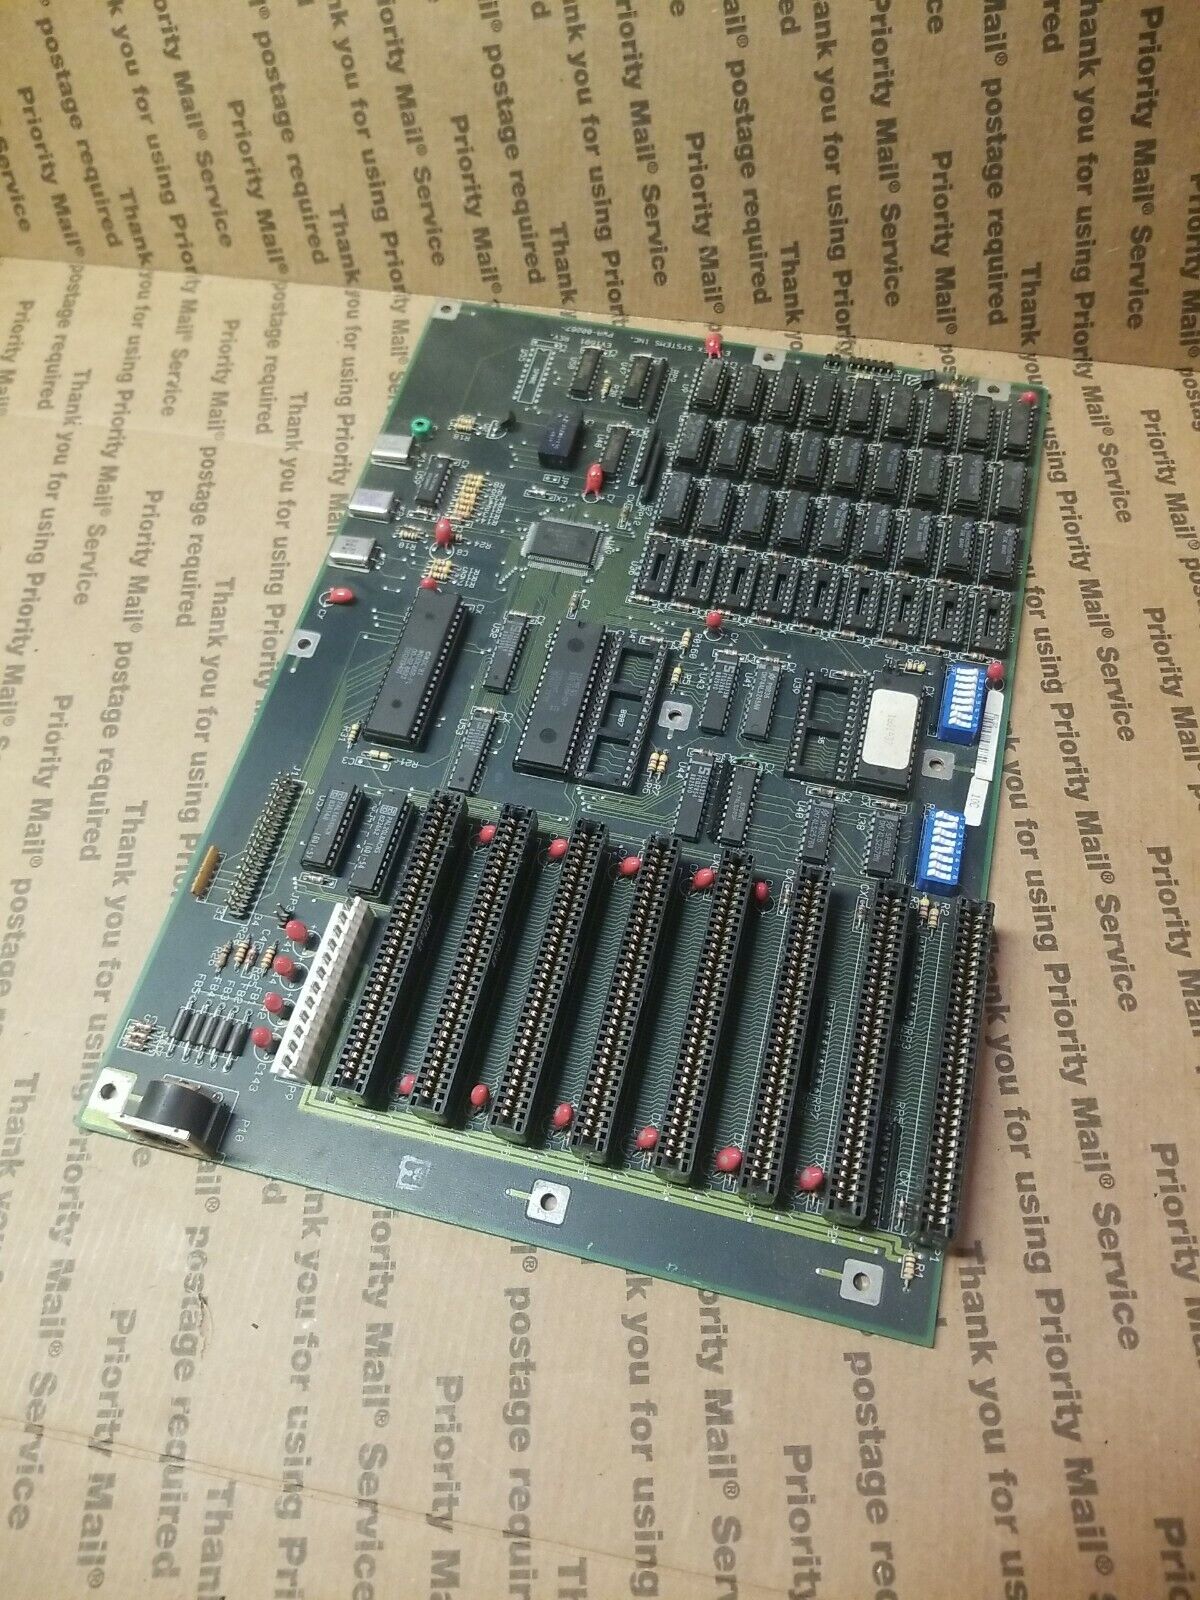 VINTAGE 1988 computer SYSTEM BOARD STYLE MOTHERBOARD - UNTESTED SOLD AS IS